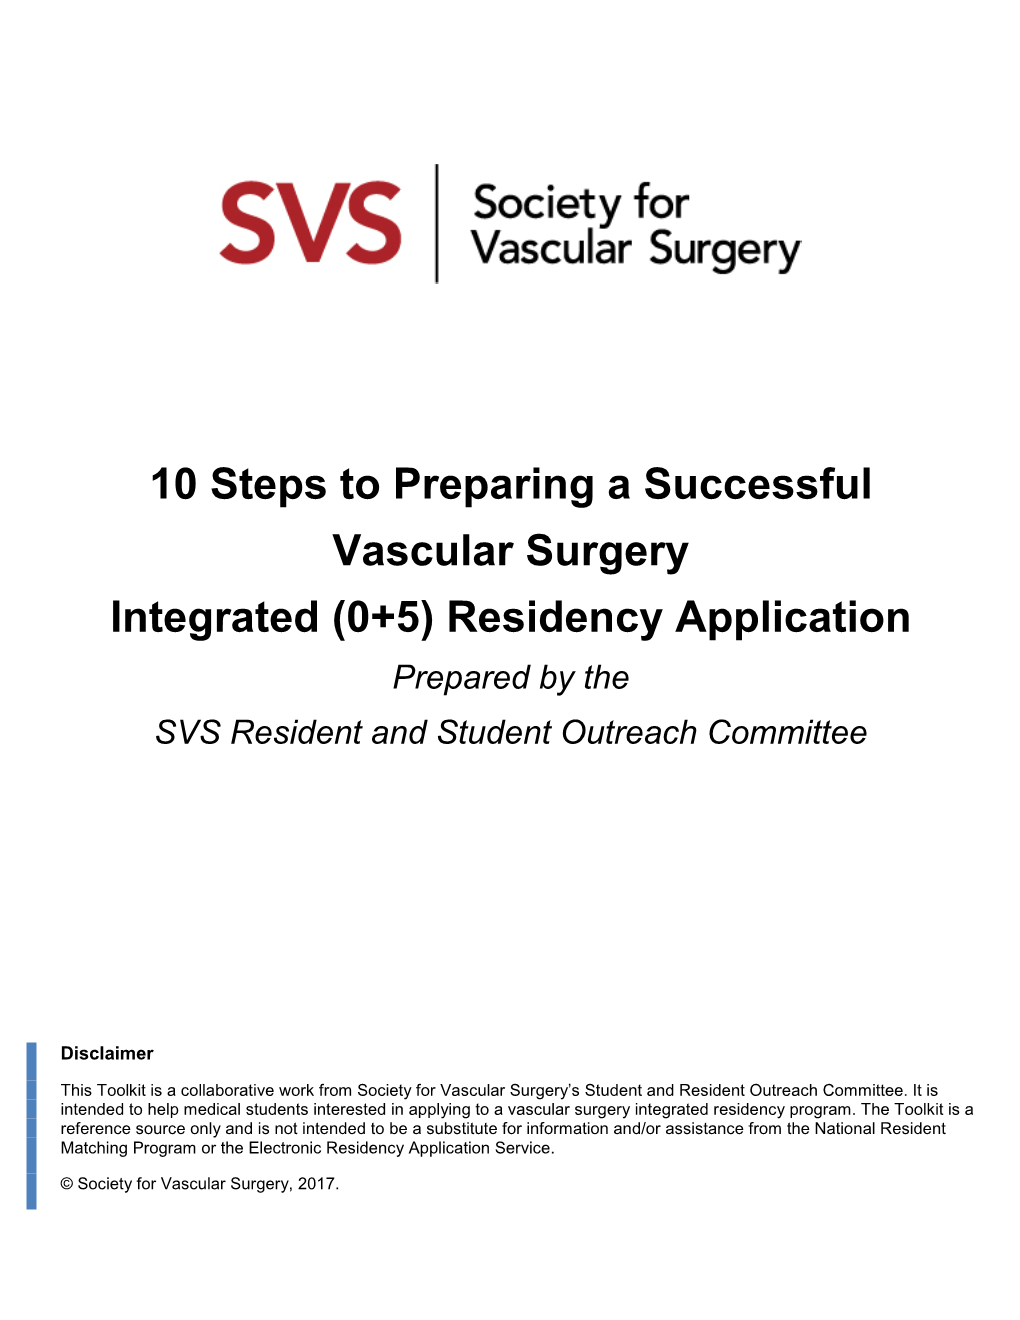 10 Steps to Preparing a Successful Vascular Surgery Integrated (0+5) Residency Application Prepared by the SVS Resident and Student Outreach Committee